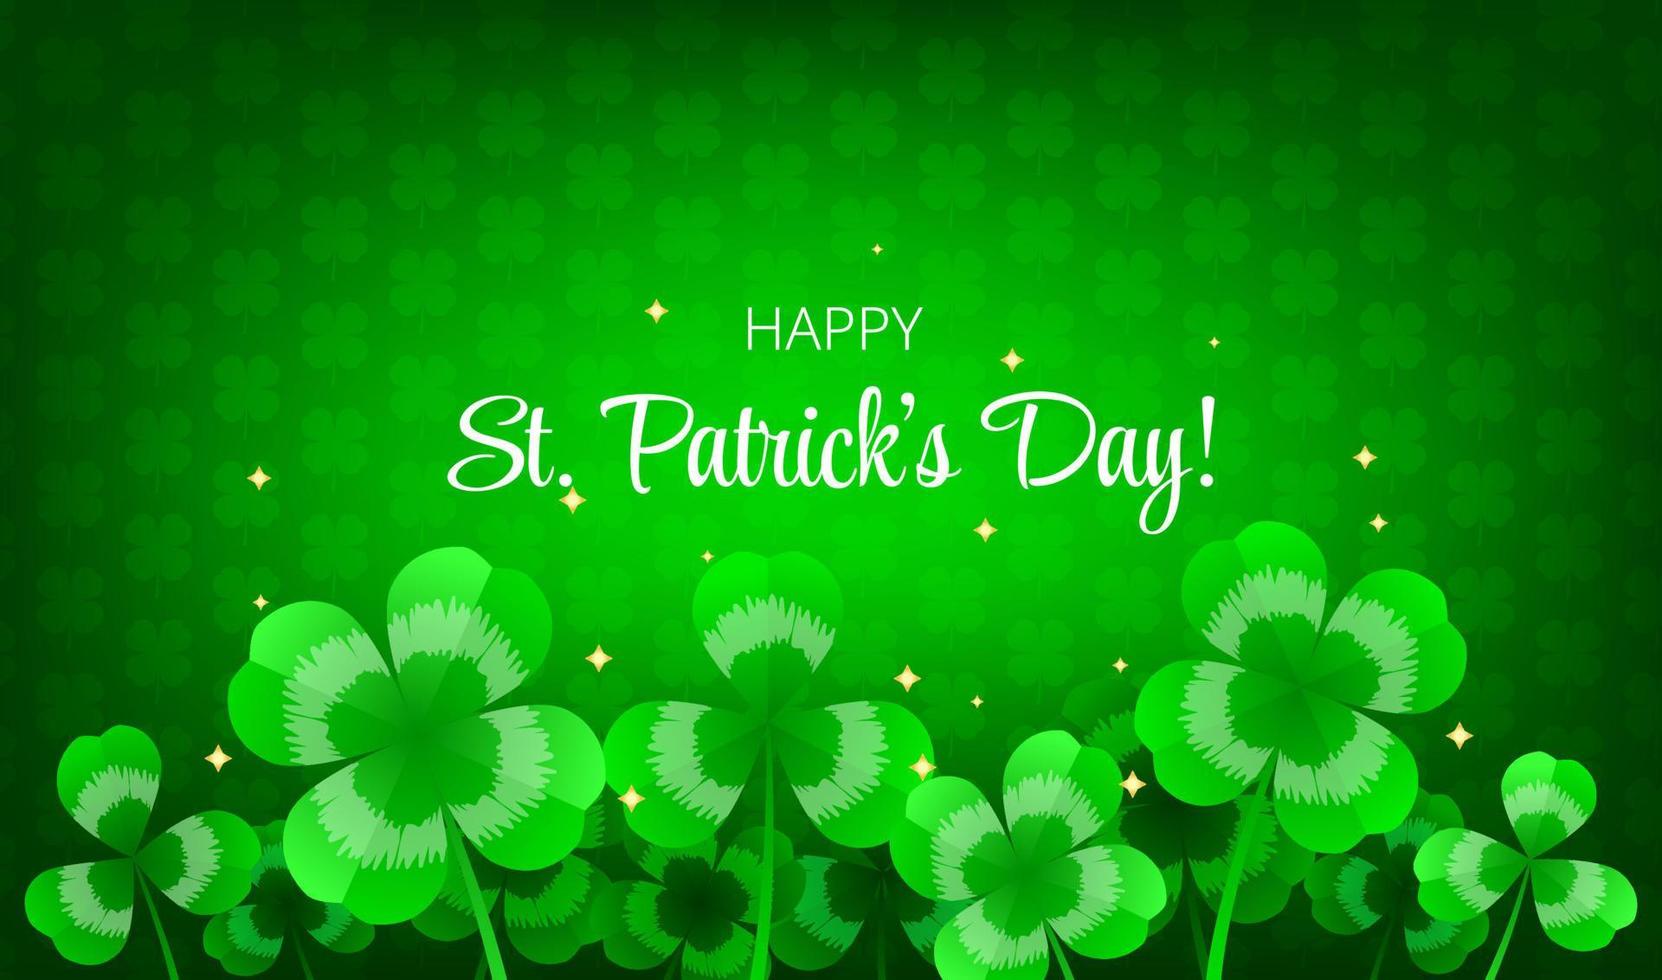 Happy Saint Patrick's Day shamrock magic background, greeting card with green four and tree leaf clovers, modern design template. Vector illustration on green clover pattern background.